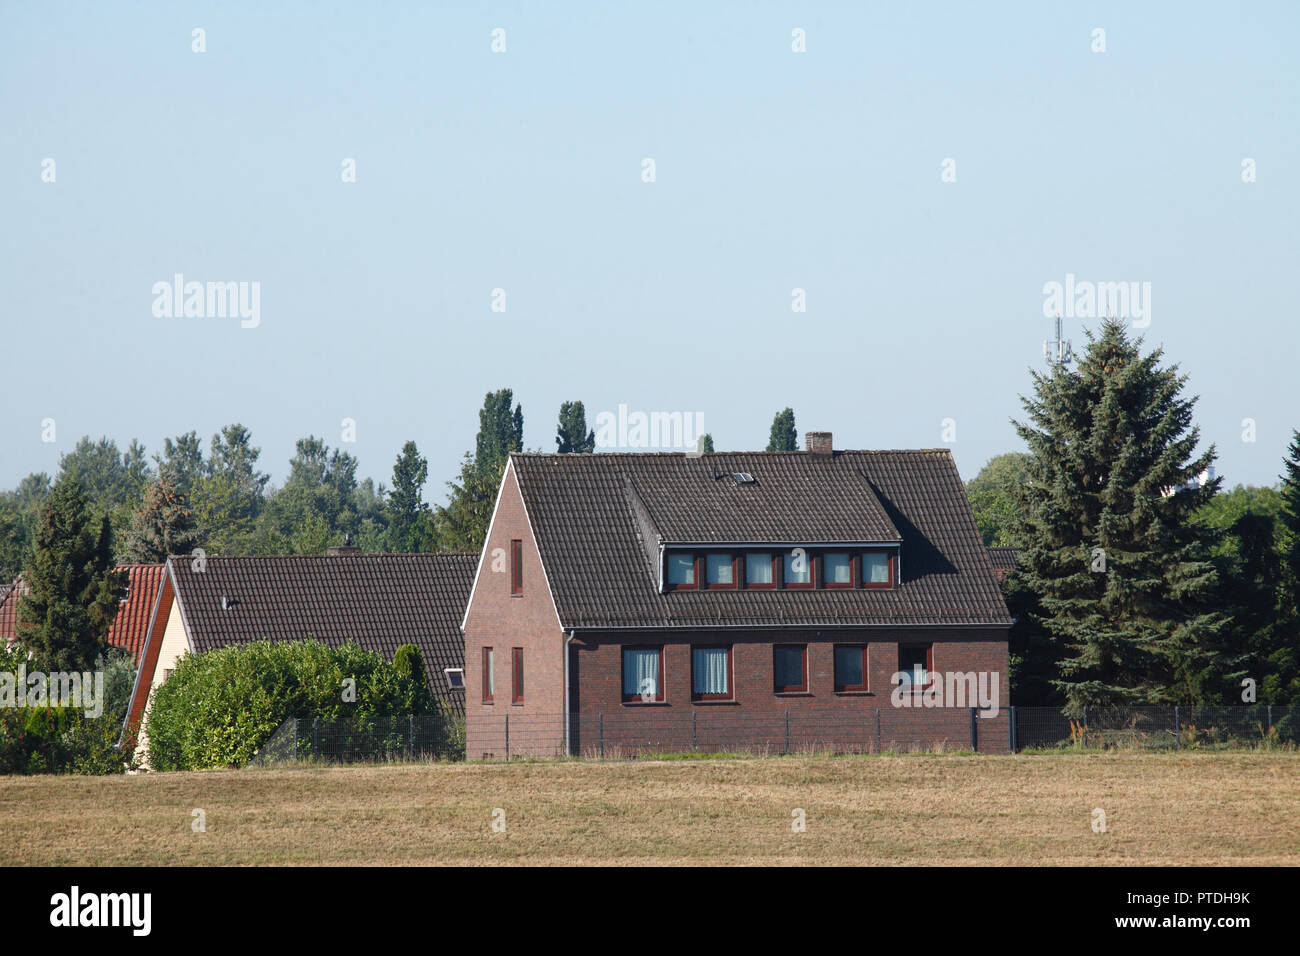 Residential houses, one-family houses in the countryside Stock Photo